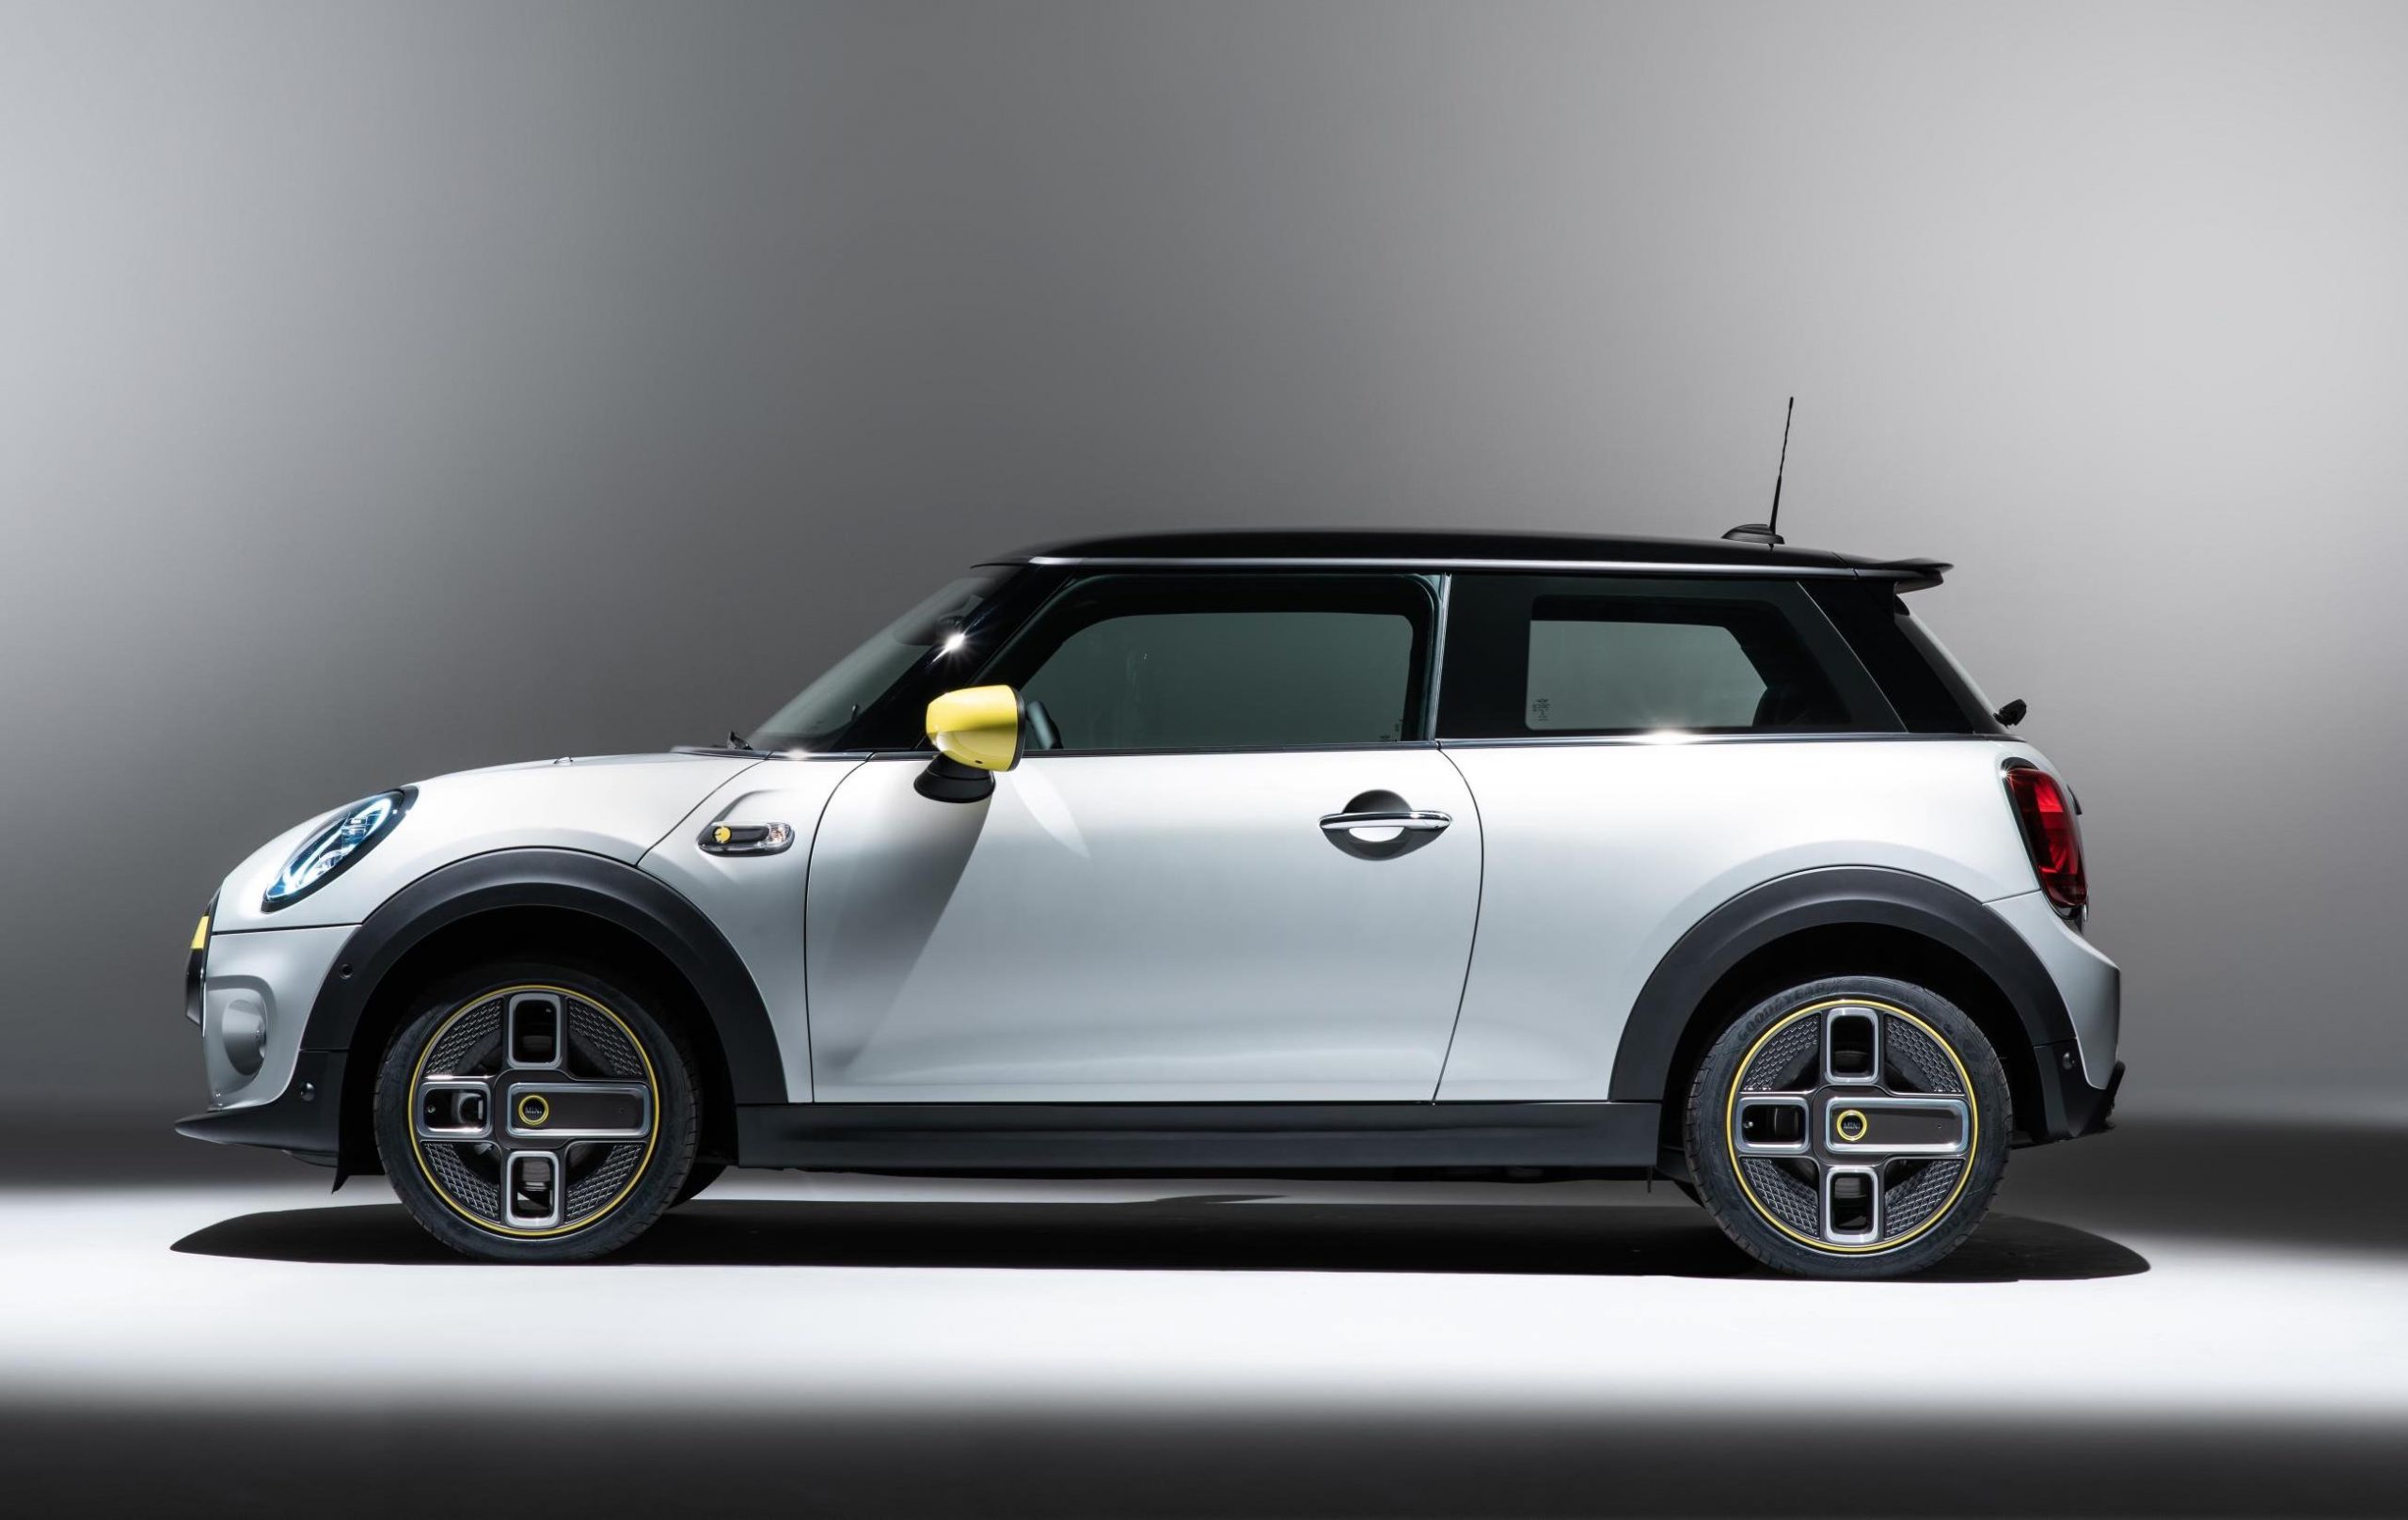 MINI Cooper SE unveiled as first fully electric model